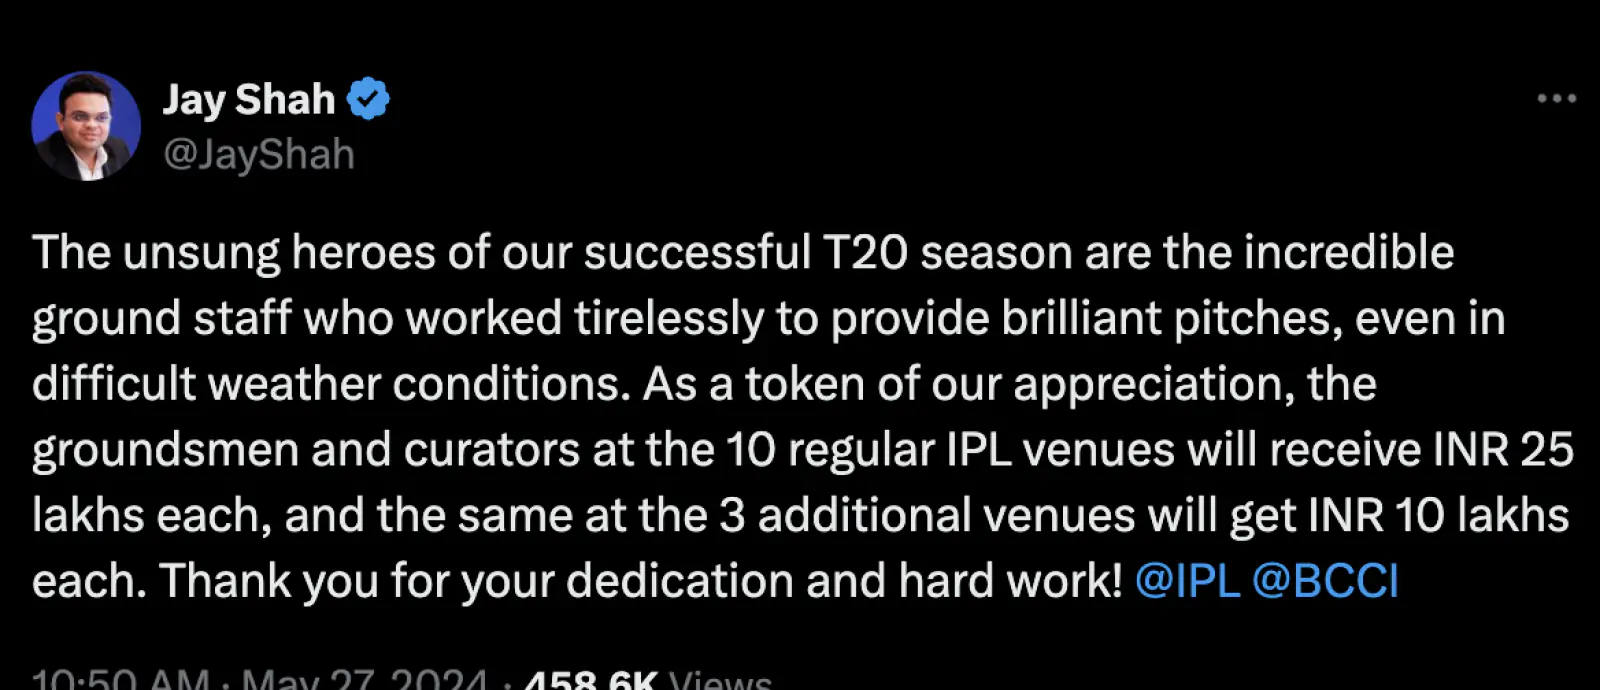 BCCI opens treasury for IPL ground staff and pitch curators, so many lakhs of rupees will be given as reward